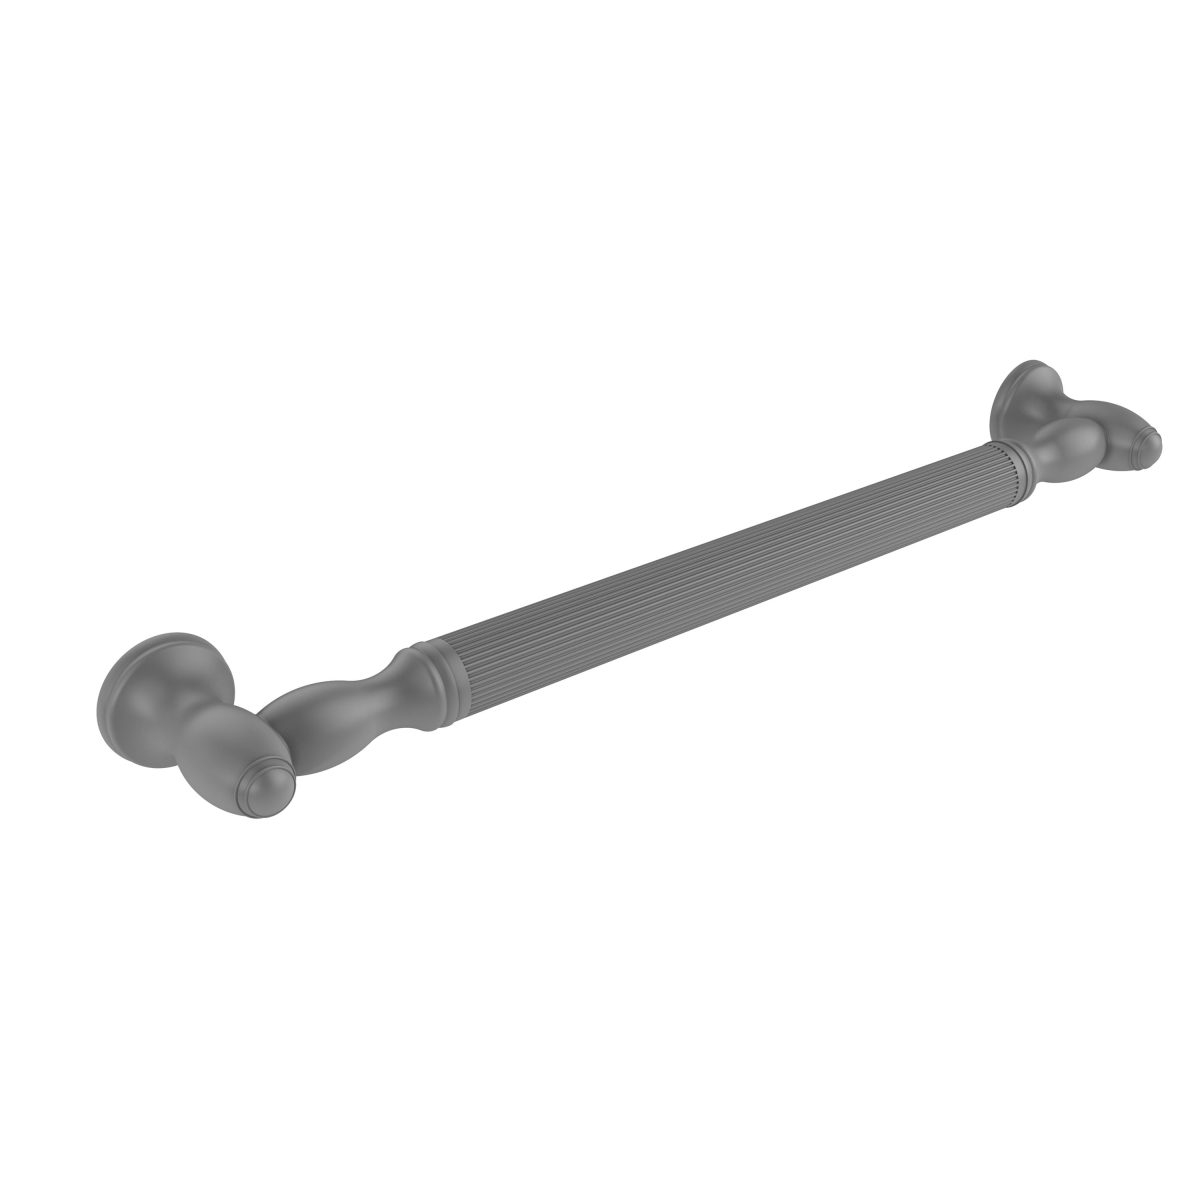 Picture of Allied Brass TD-GRR-36-GYM 36 in. Reeded Grab Bar, Matte Gray - 3.5 x 38 x 36 in.